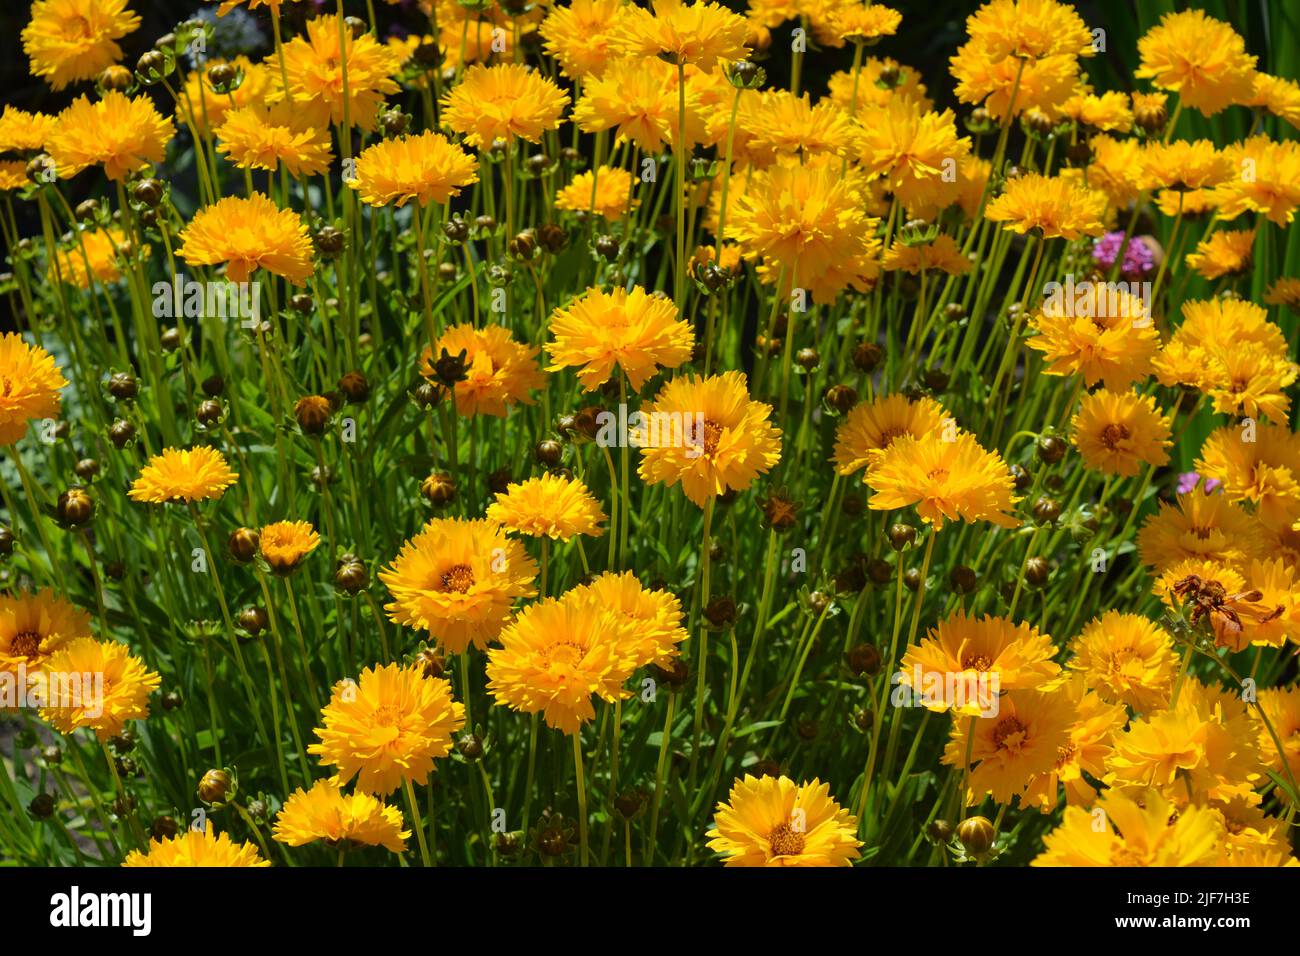 Coreopsis grandiflora Sunburst in flower, also known as tickseed, a stunning perennial plant bursting with bright yellow colour Stock Photo